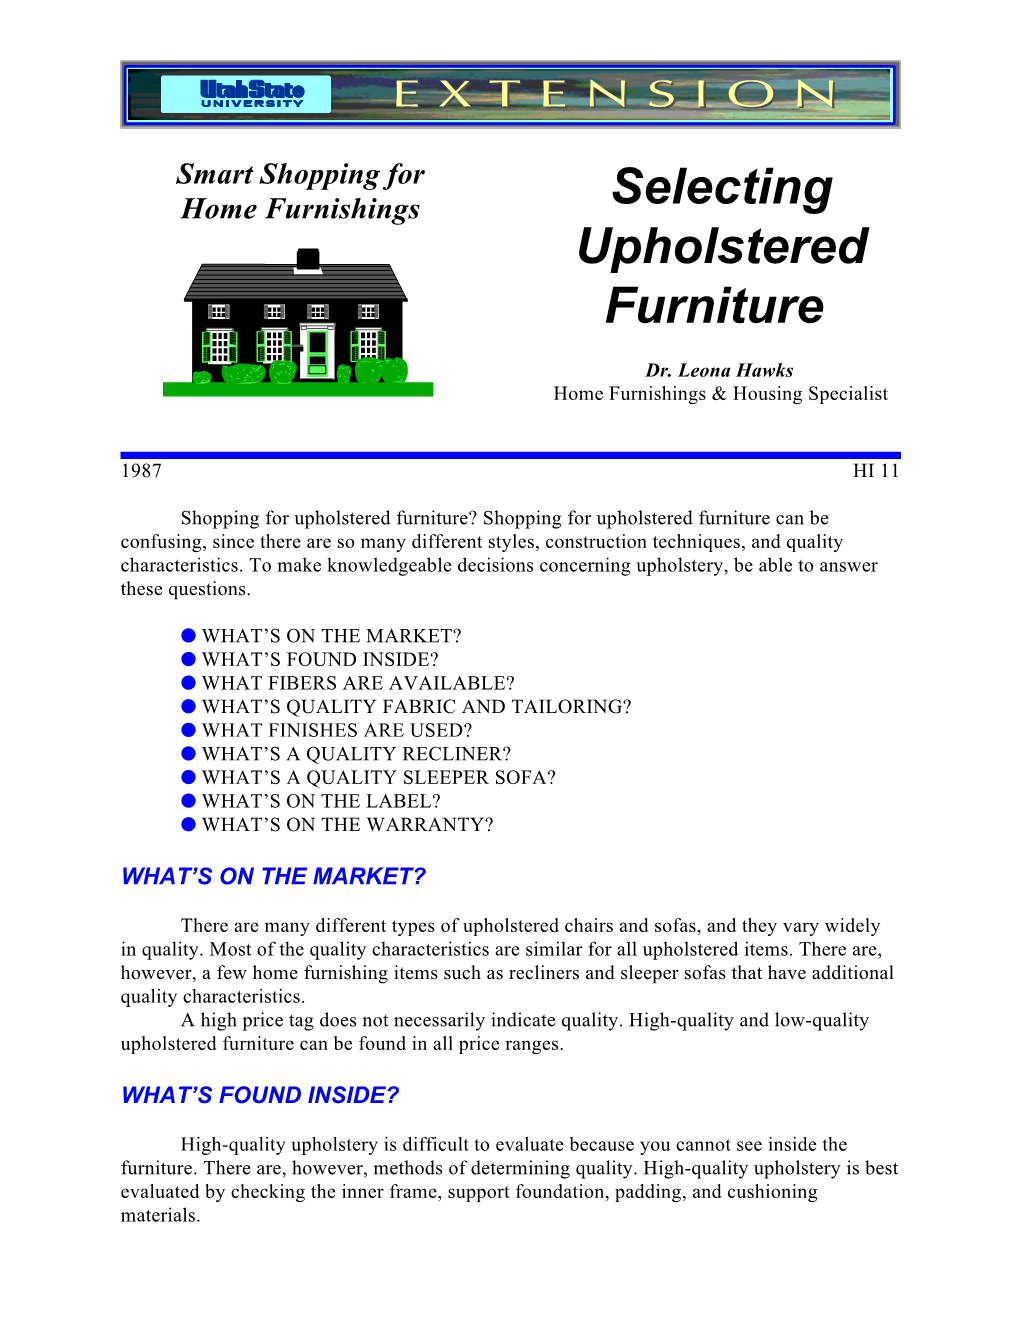 Selecting Upholstered Furniture